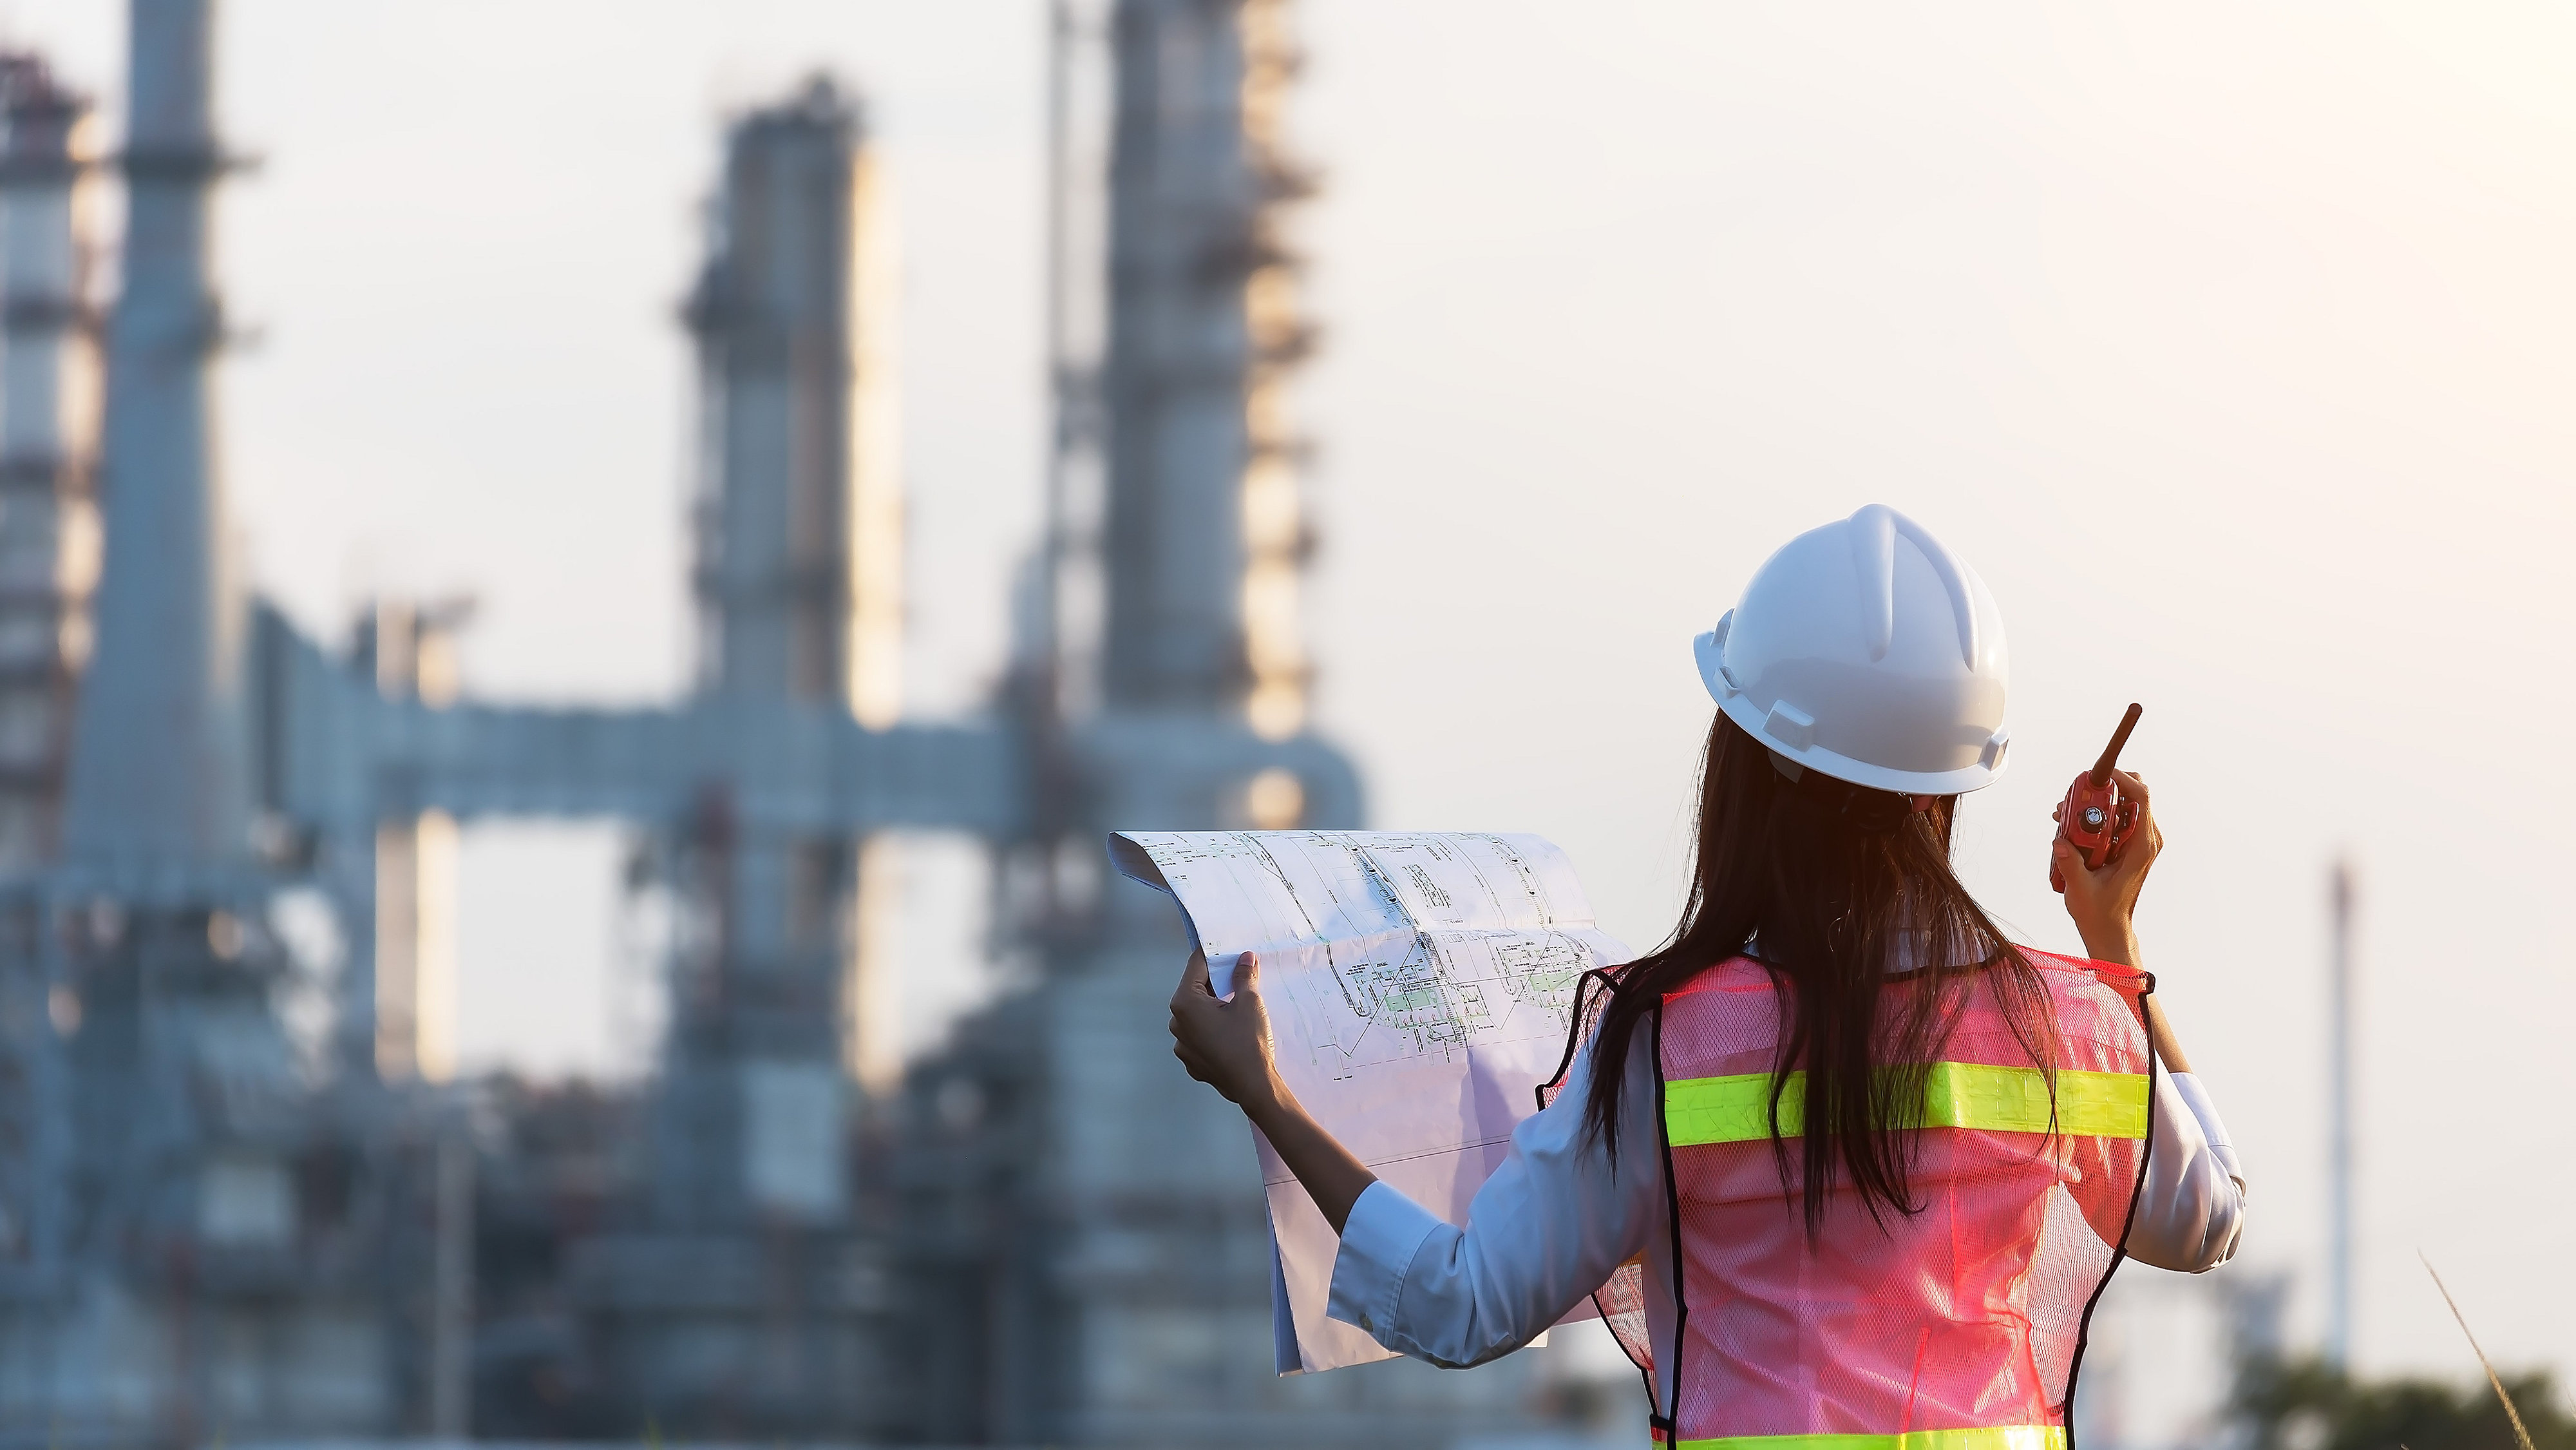 Black female construction worker in front of industrial site